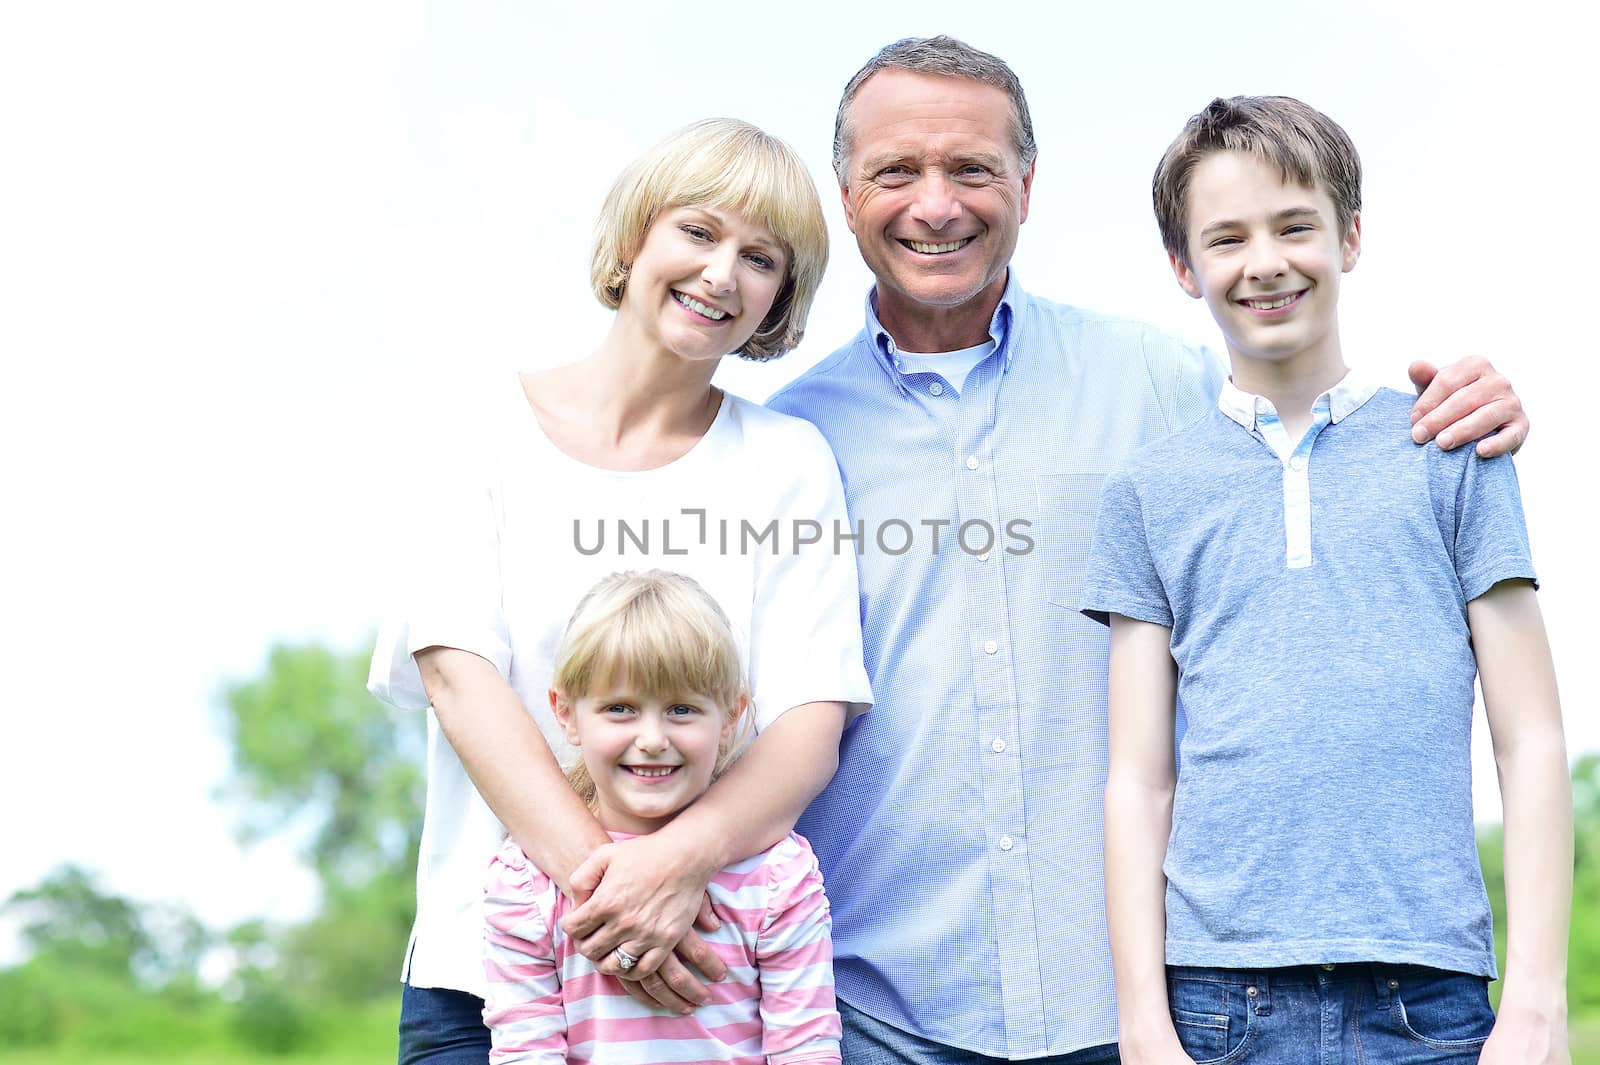 Happy family of four posing together in park